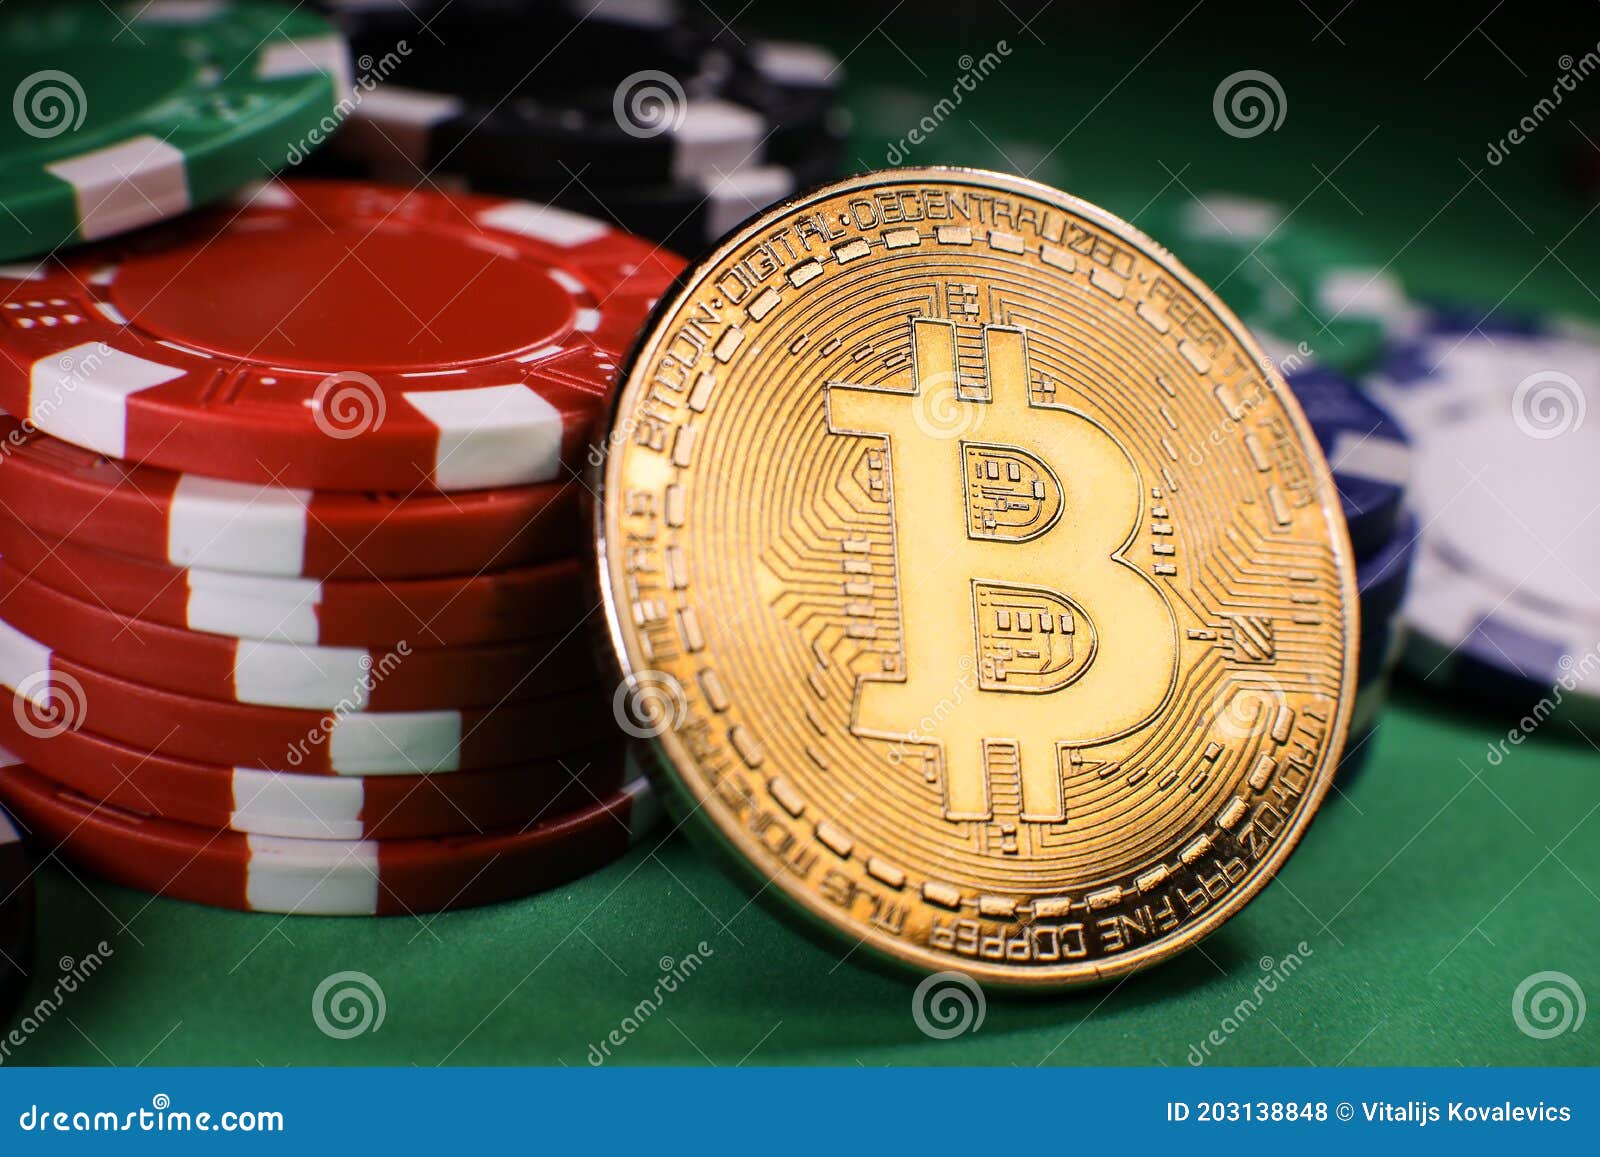 5 Secrets: How To Use top crypto casinos To Create A Successful Business Product